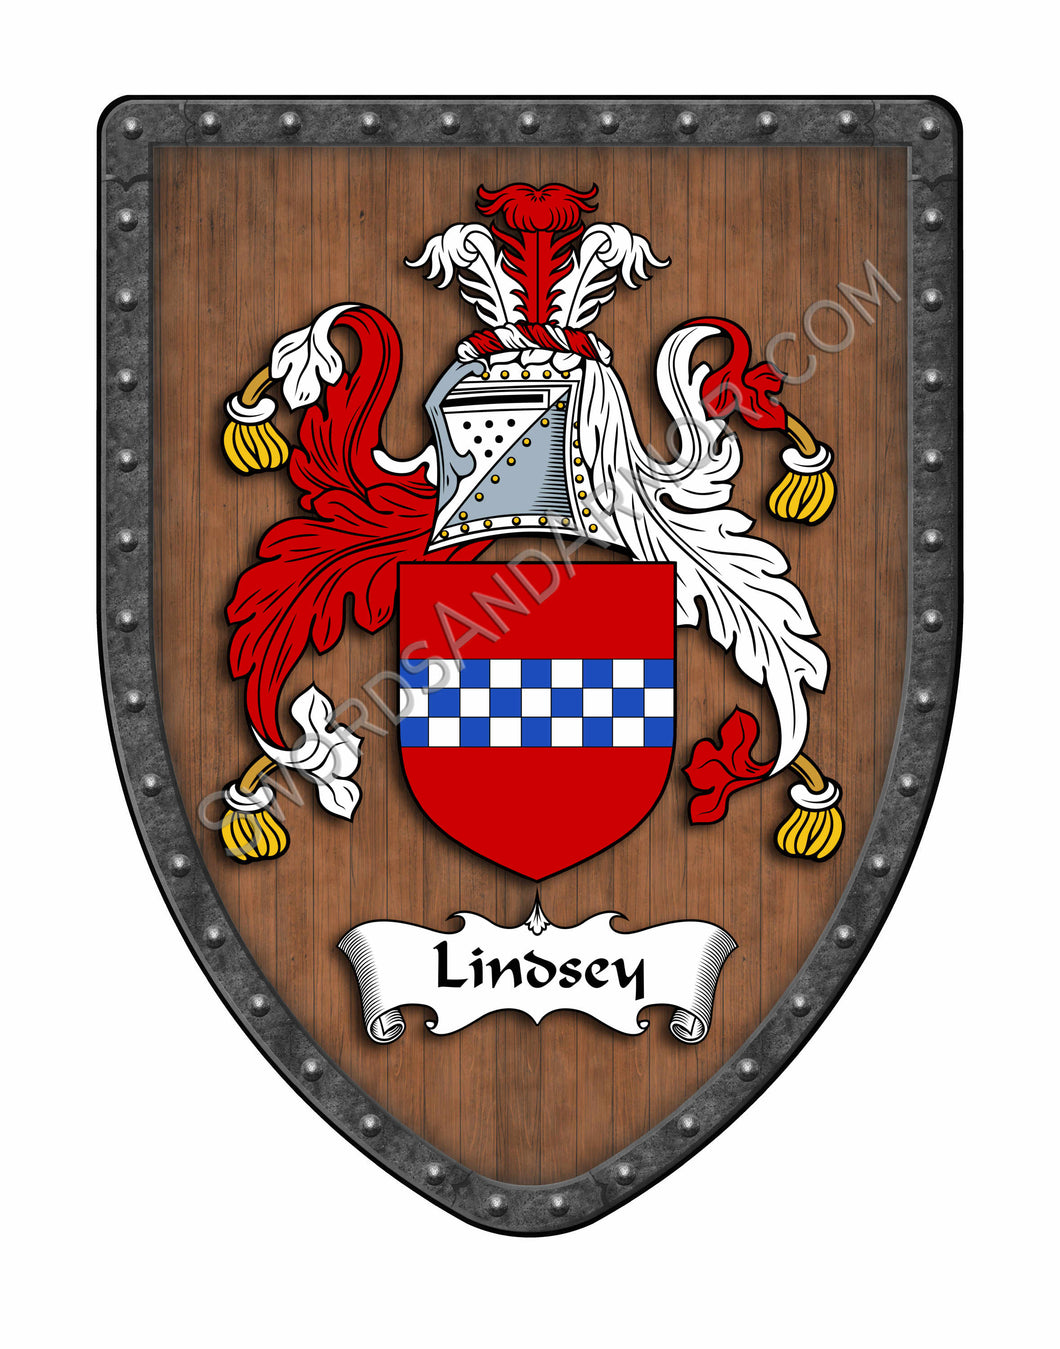 Lindsay of Scotland Family Crest and Coat of Arms